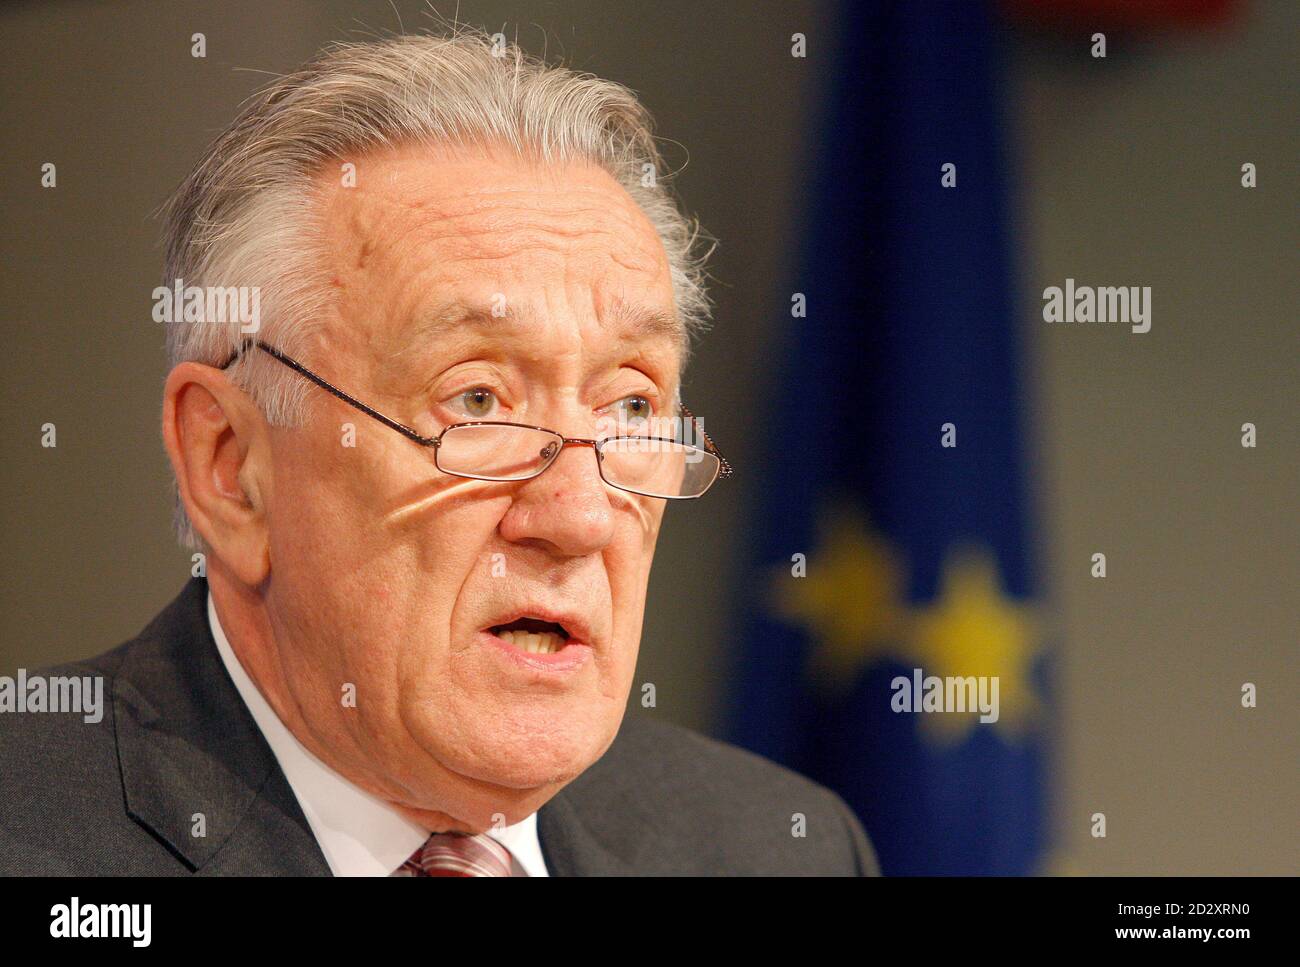 European Commissioner for Taxation and Customs Union Laszlo Kovacs gives a news conference on the proposal of reduced VAT rates at the EU Commission's Headquarters in Brussels July 7, 2008. REUTERS/Sebastien Pirlet   (BELGIUM) Stock Photo